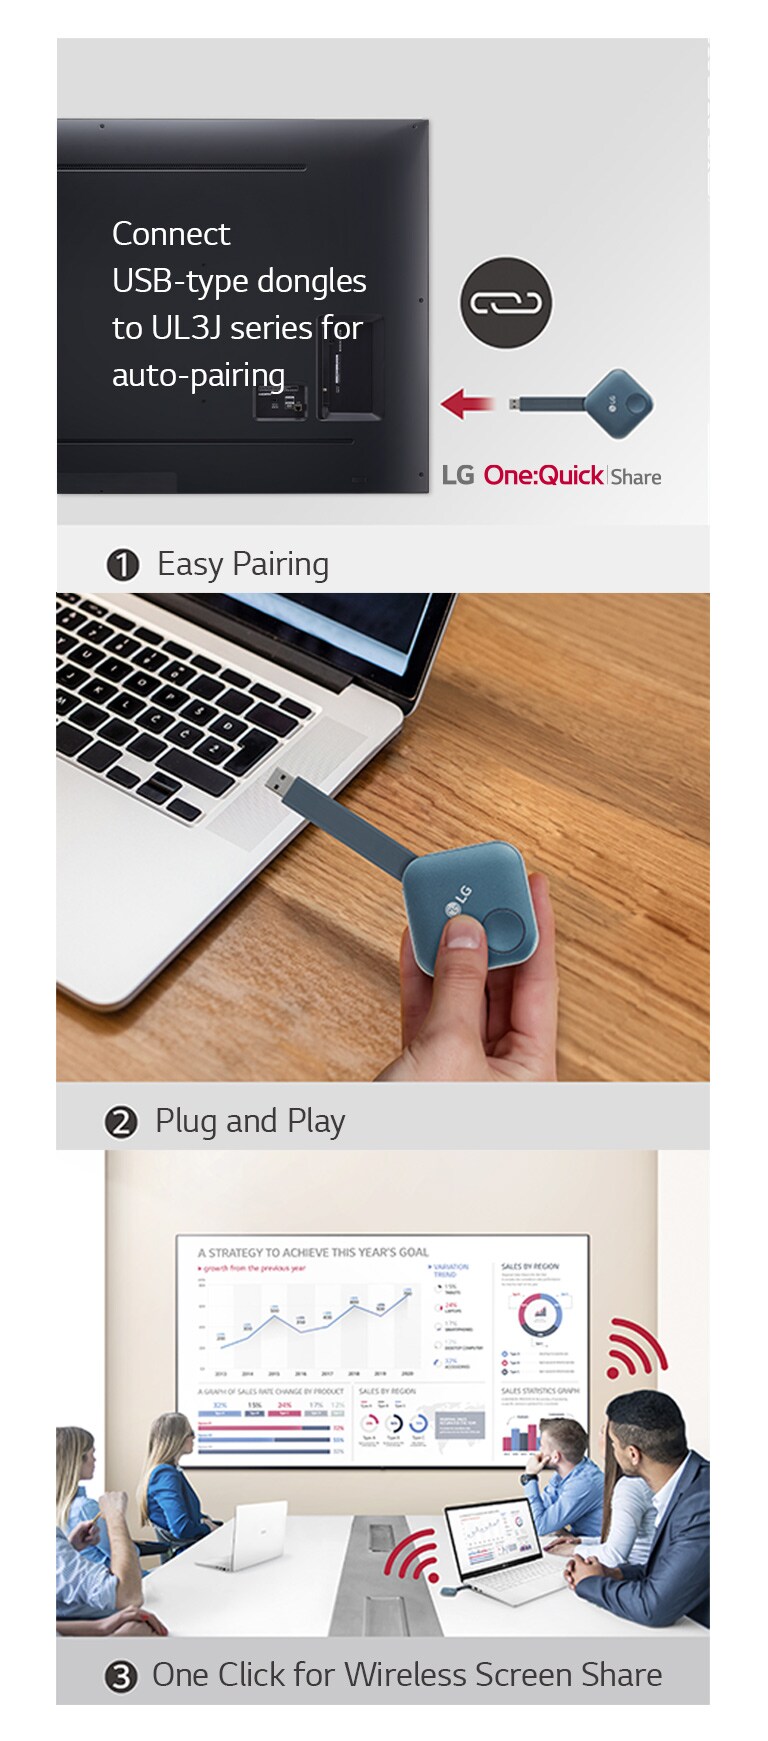 &quot;This consist of images displaying the 3-step instructions on installing LG One:Quick Share USB Dongle and sharing the personal screen. The first image pairs the USB Dongle and the LG signage. The second image describes a person holding the USB dongle, attempting to connect it to the PC. The last image consists of people having a meeting by connecting an USB dongle device to a laptop, then sharing the screen through the UL3J on the wall.&quot;